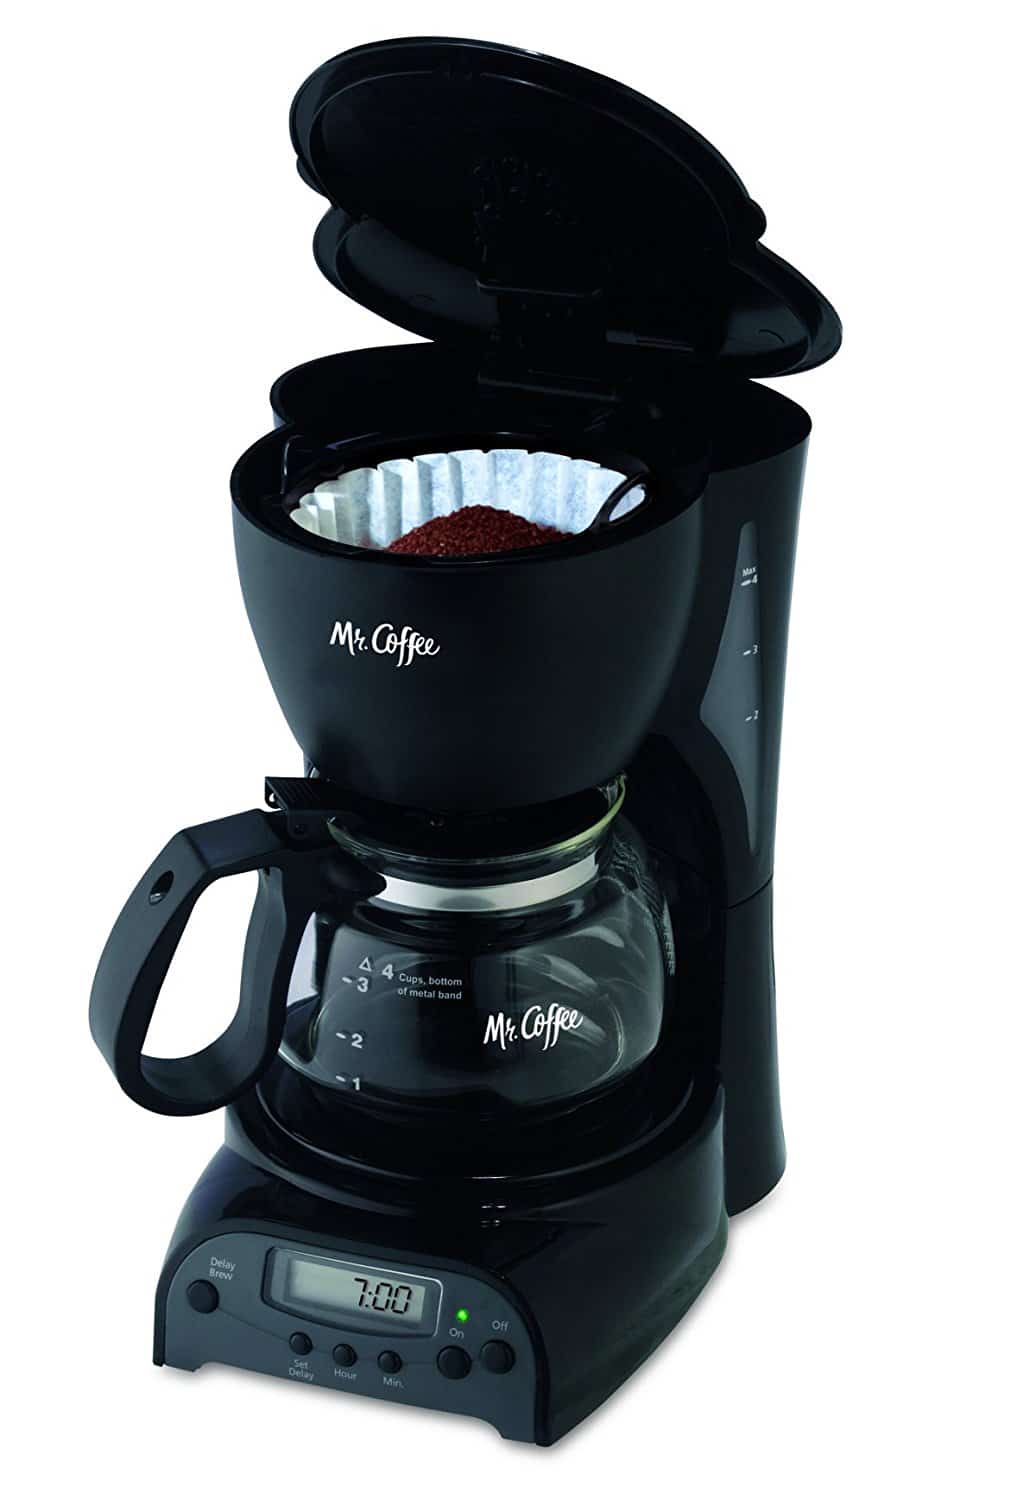 Mr. Coffee - 4 Cup Programmable Coffee Maker